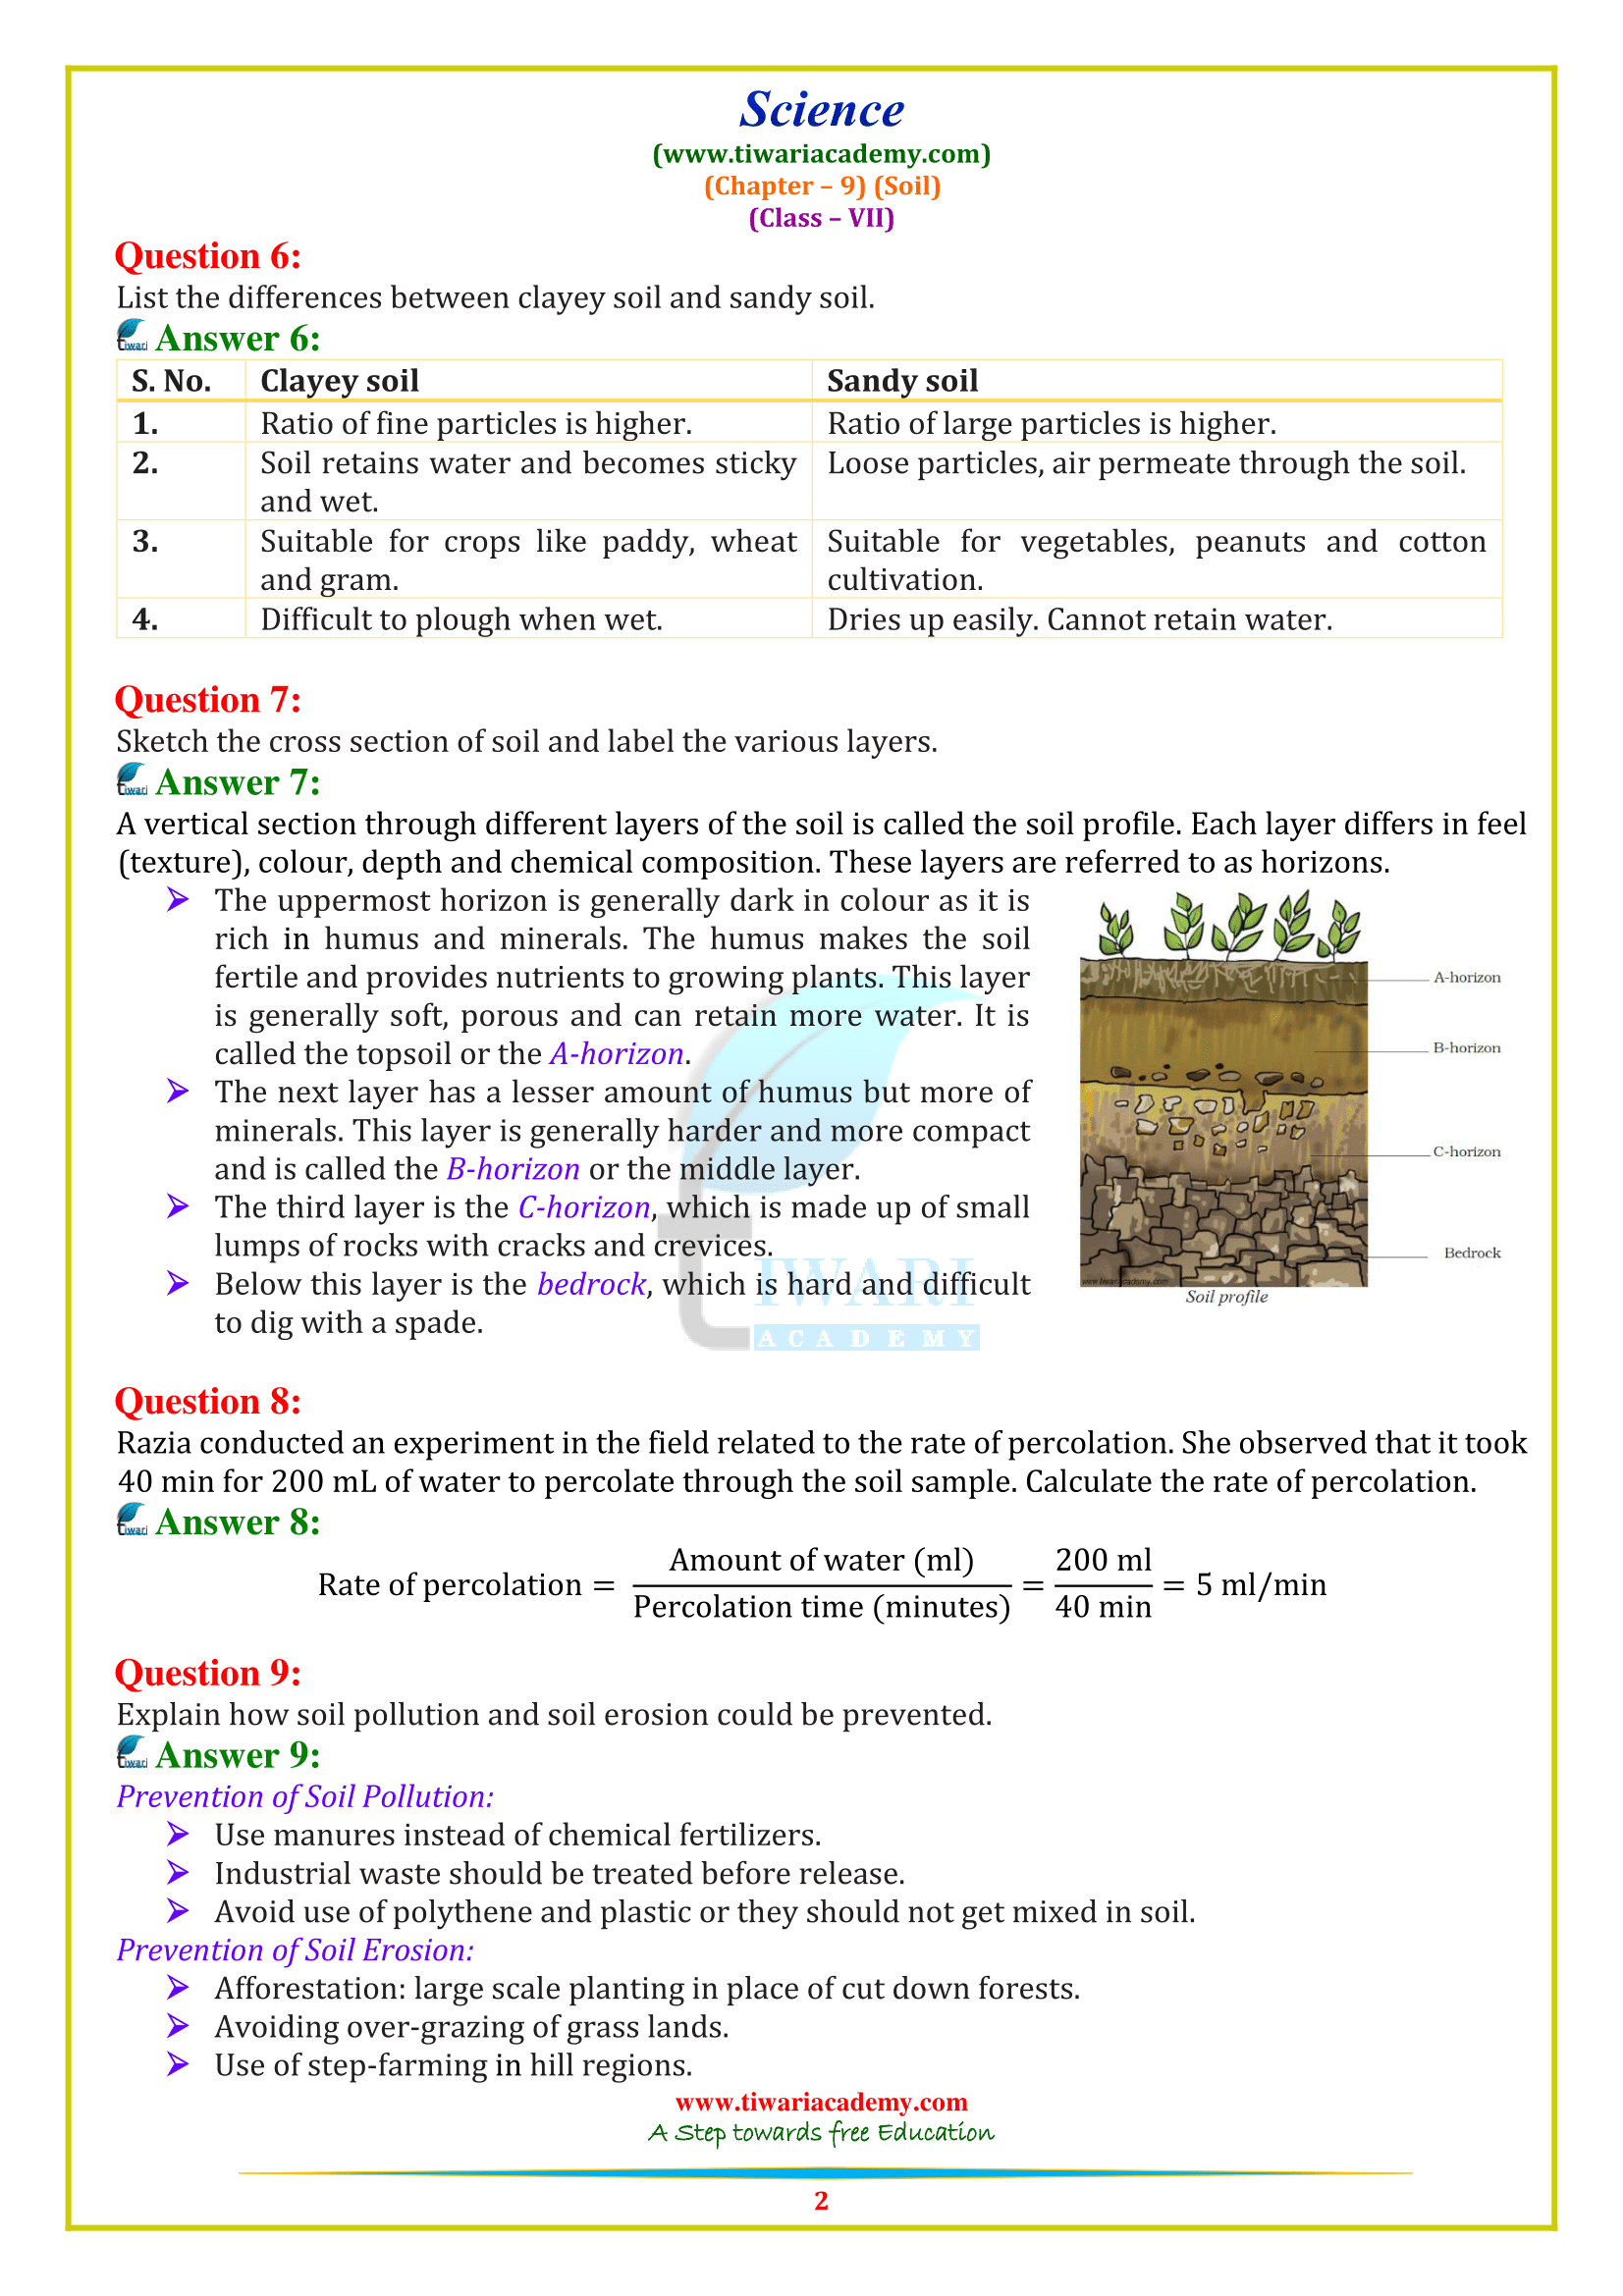 CBSE NCERT Solutions for Class 7 Science Chapter 9 Soil in PDF form